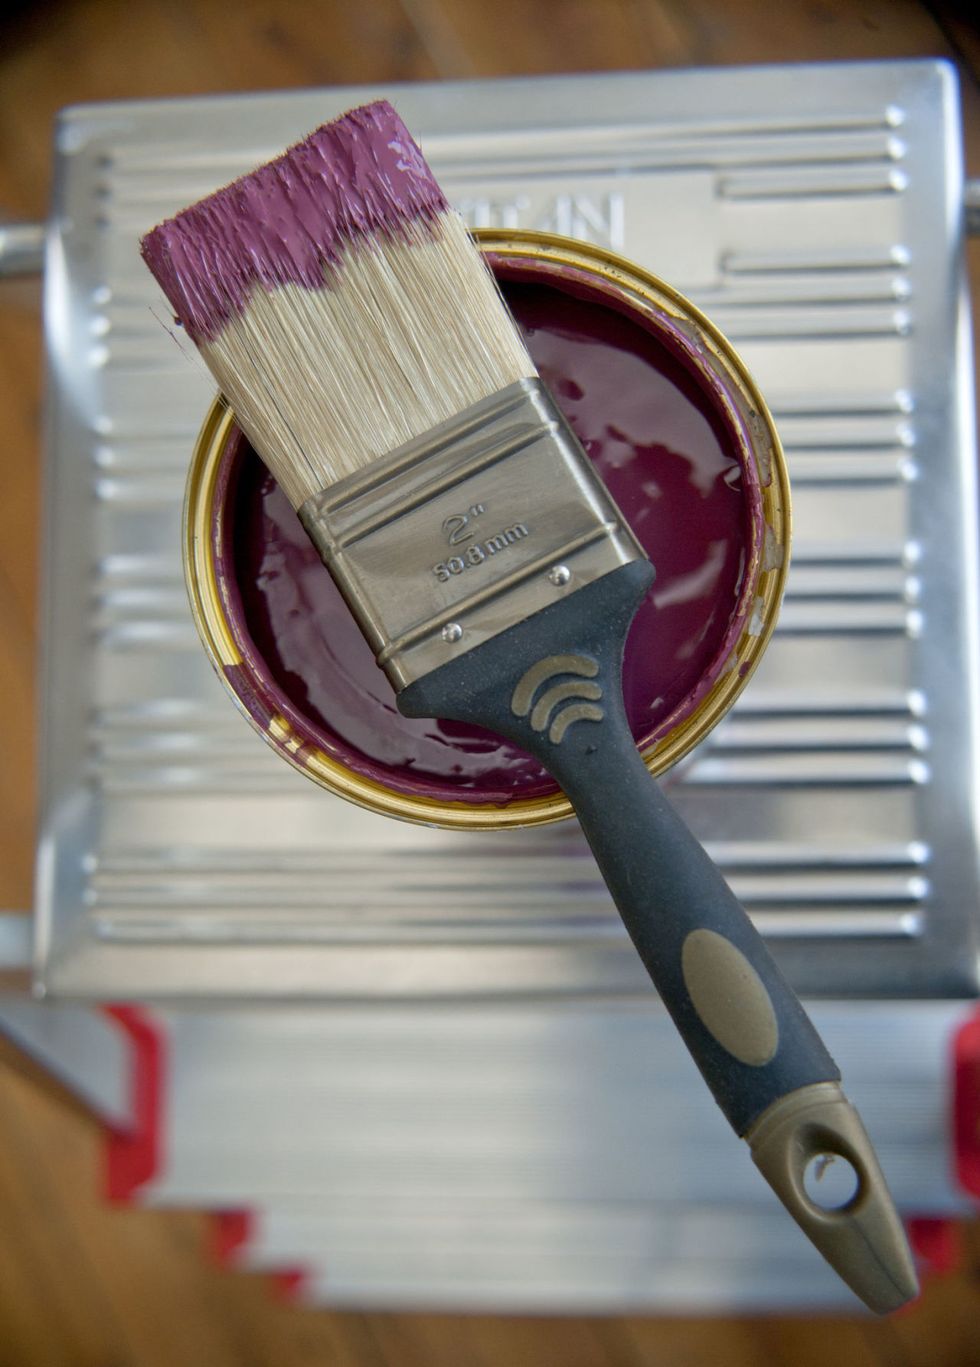 Still life of paint brush dipped in paint